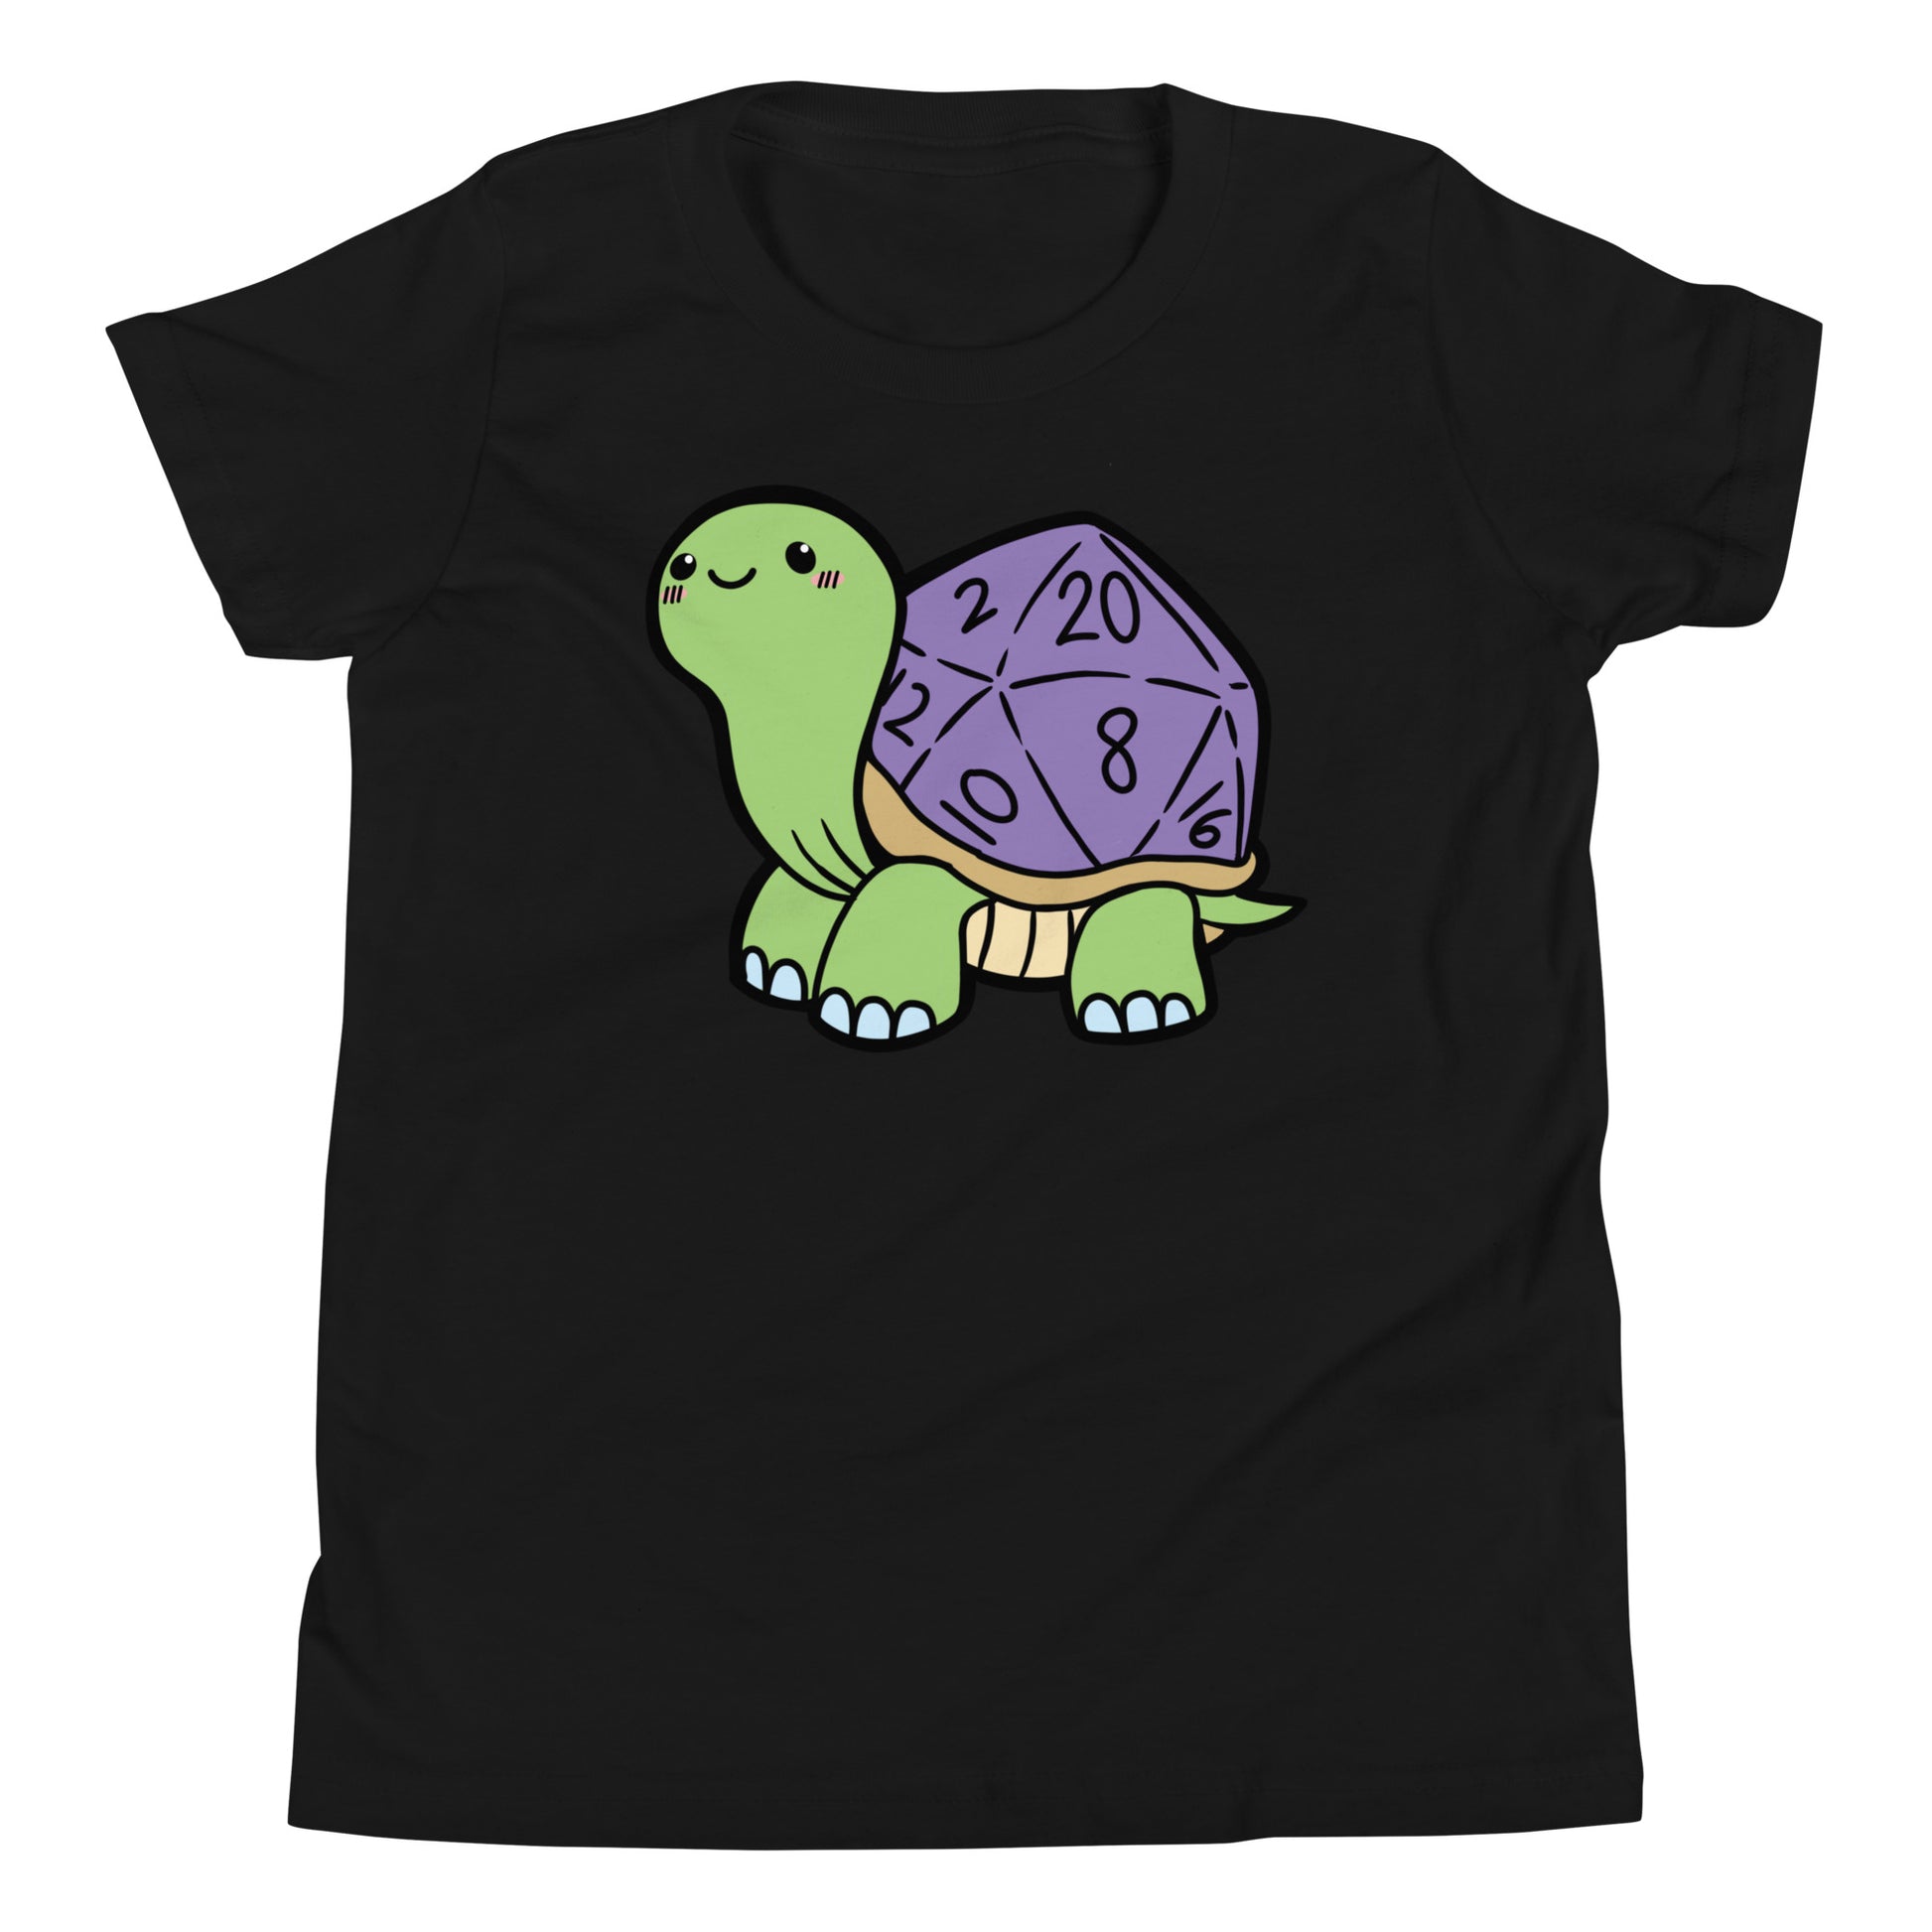 D20 Dice Turtle Youth Short Sleeve T-Shirt  Level 1 Gamers Black S 